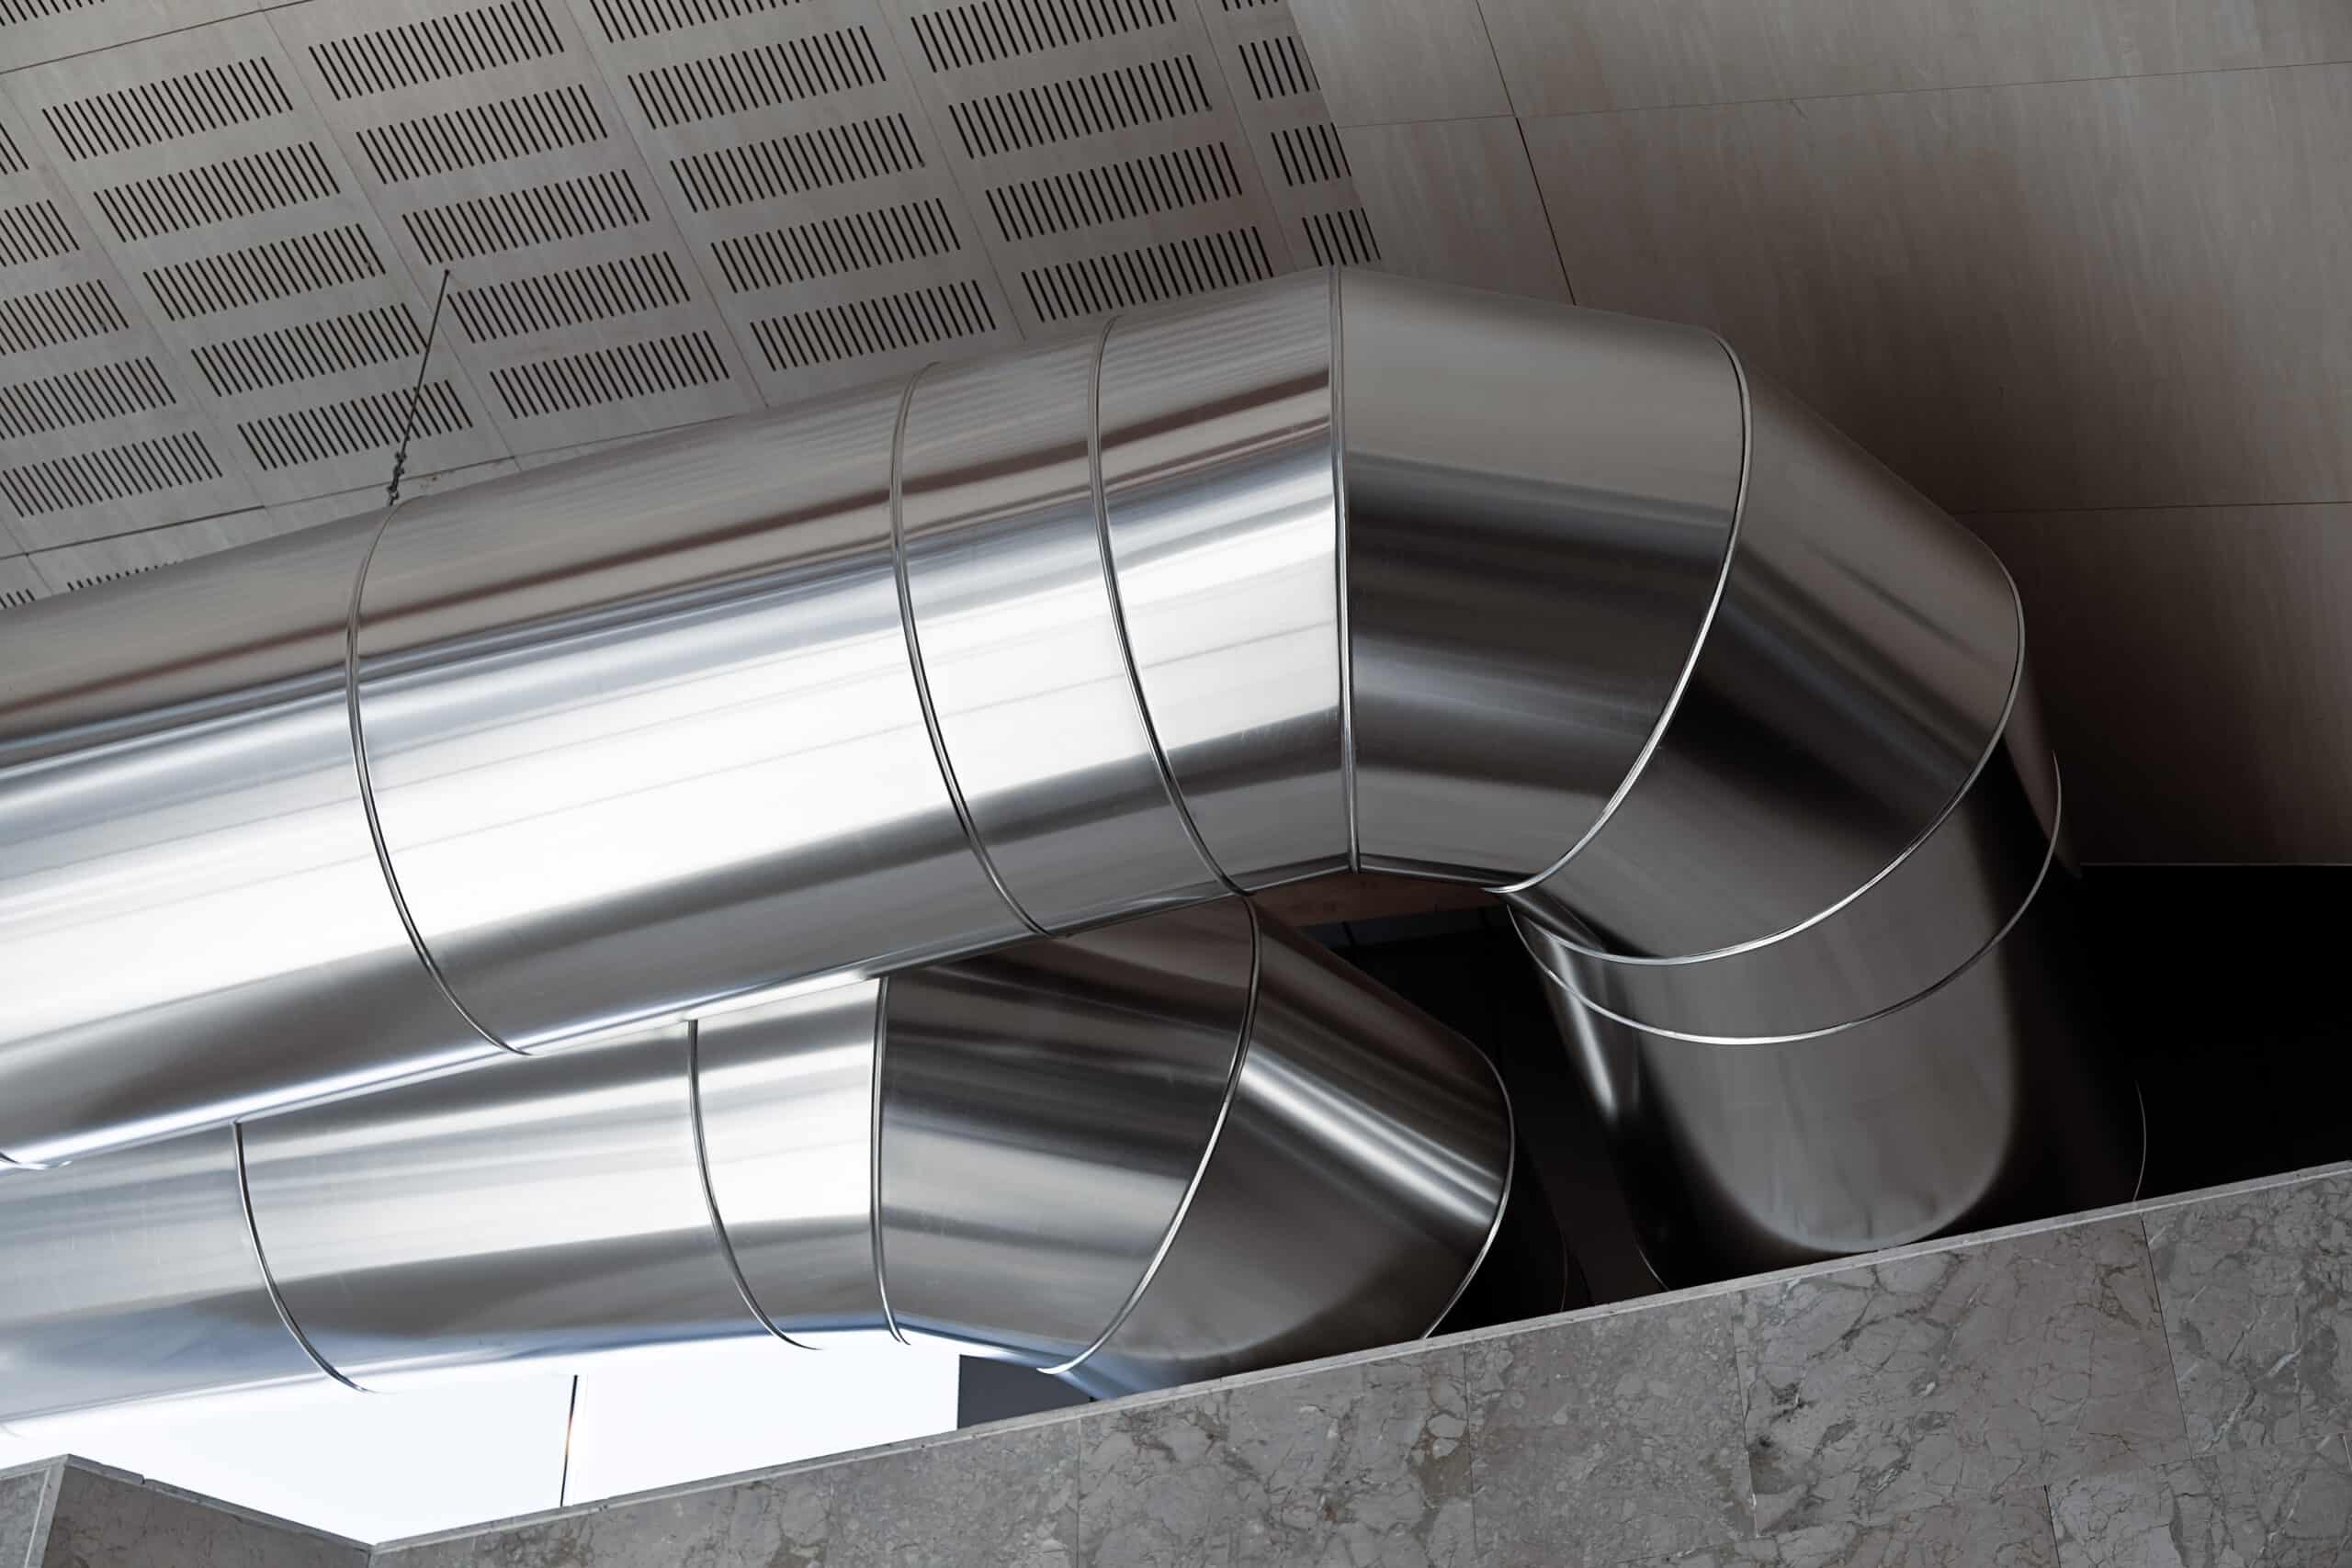 3+ Important Things To Know About Ductwork